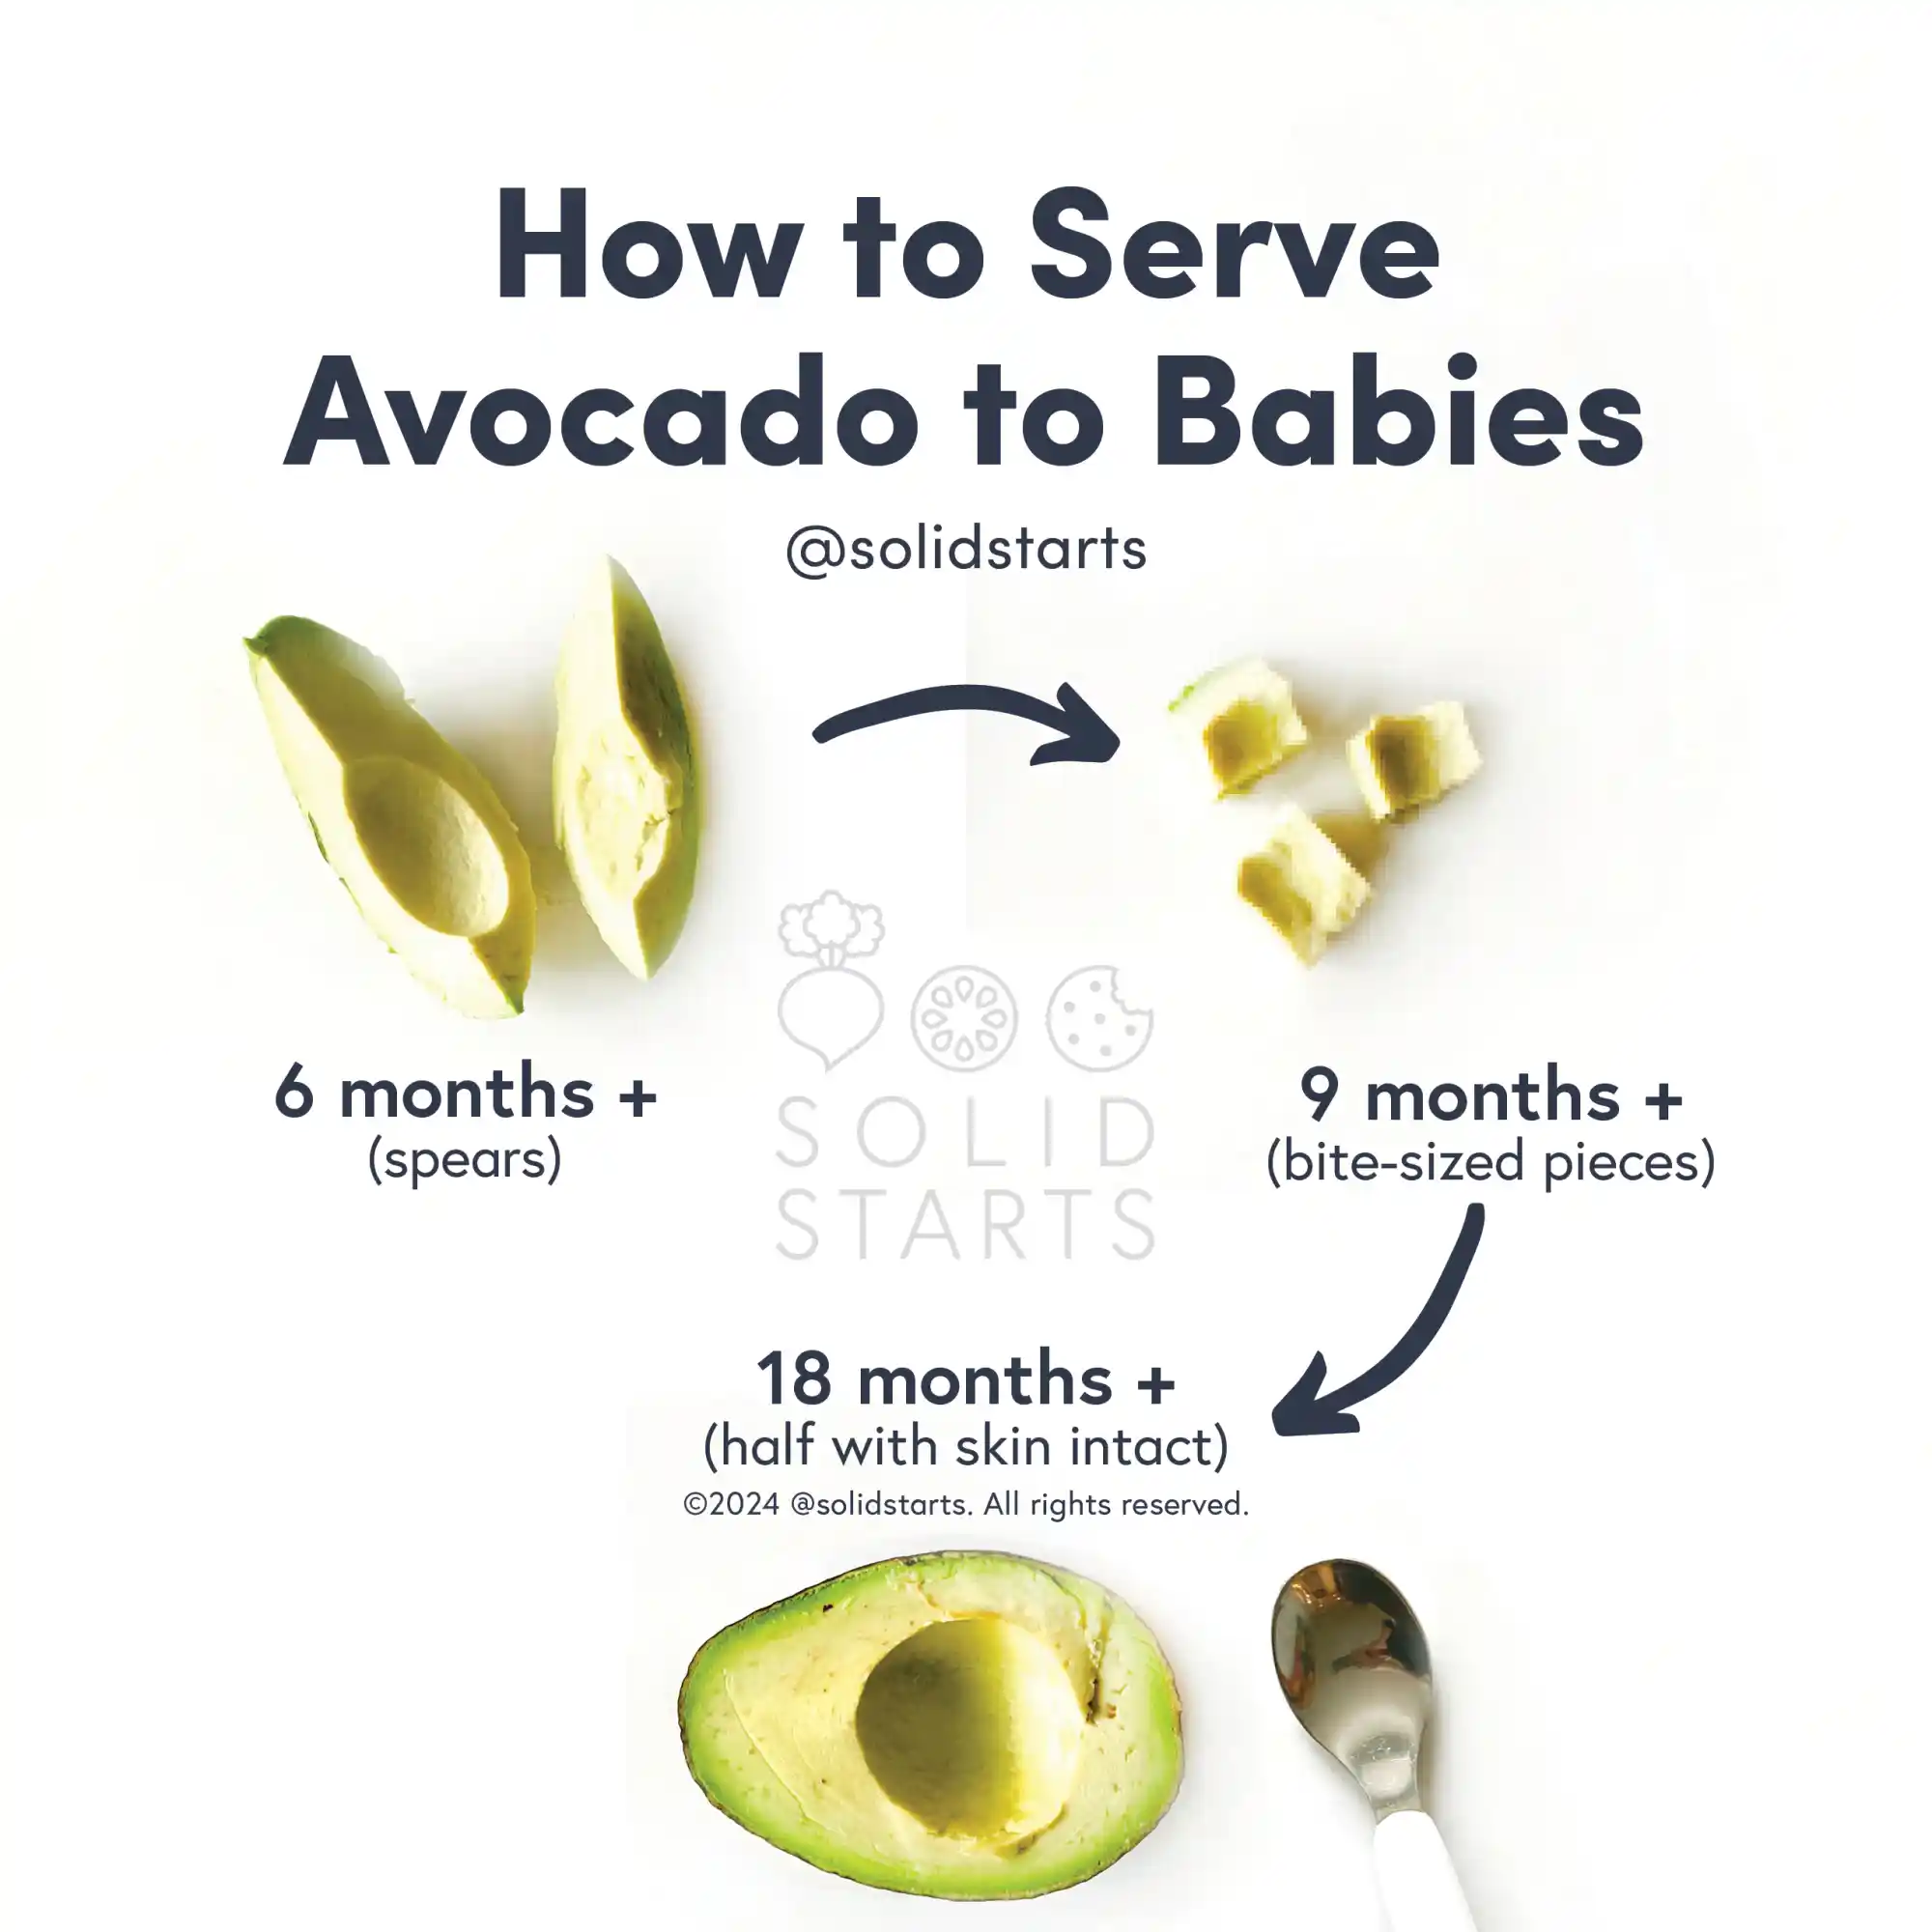 infographic titled "How to Cut Avocado for Babies" showing images of avocado for different age ranges. For 6+ months, image of two peeled, quartered avocado slices. For 9 months+, image of bite-sized avocado pieces. For 18+ months, image of half an avocado